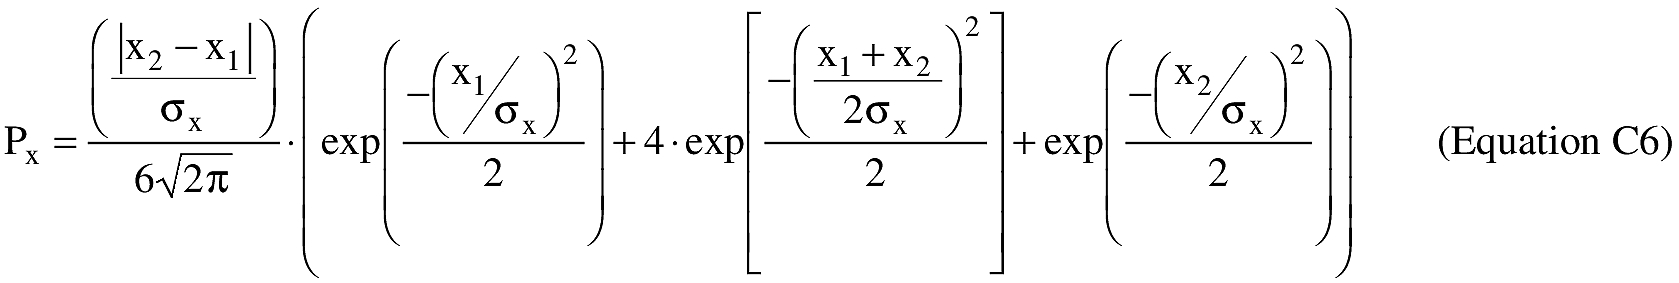 Equation for (A) An applicant shall estimate the probability of final stage impact in the x and y sectors of each populated area within the final stage impact dispersion area using equations C6 and C7